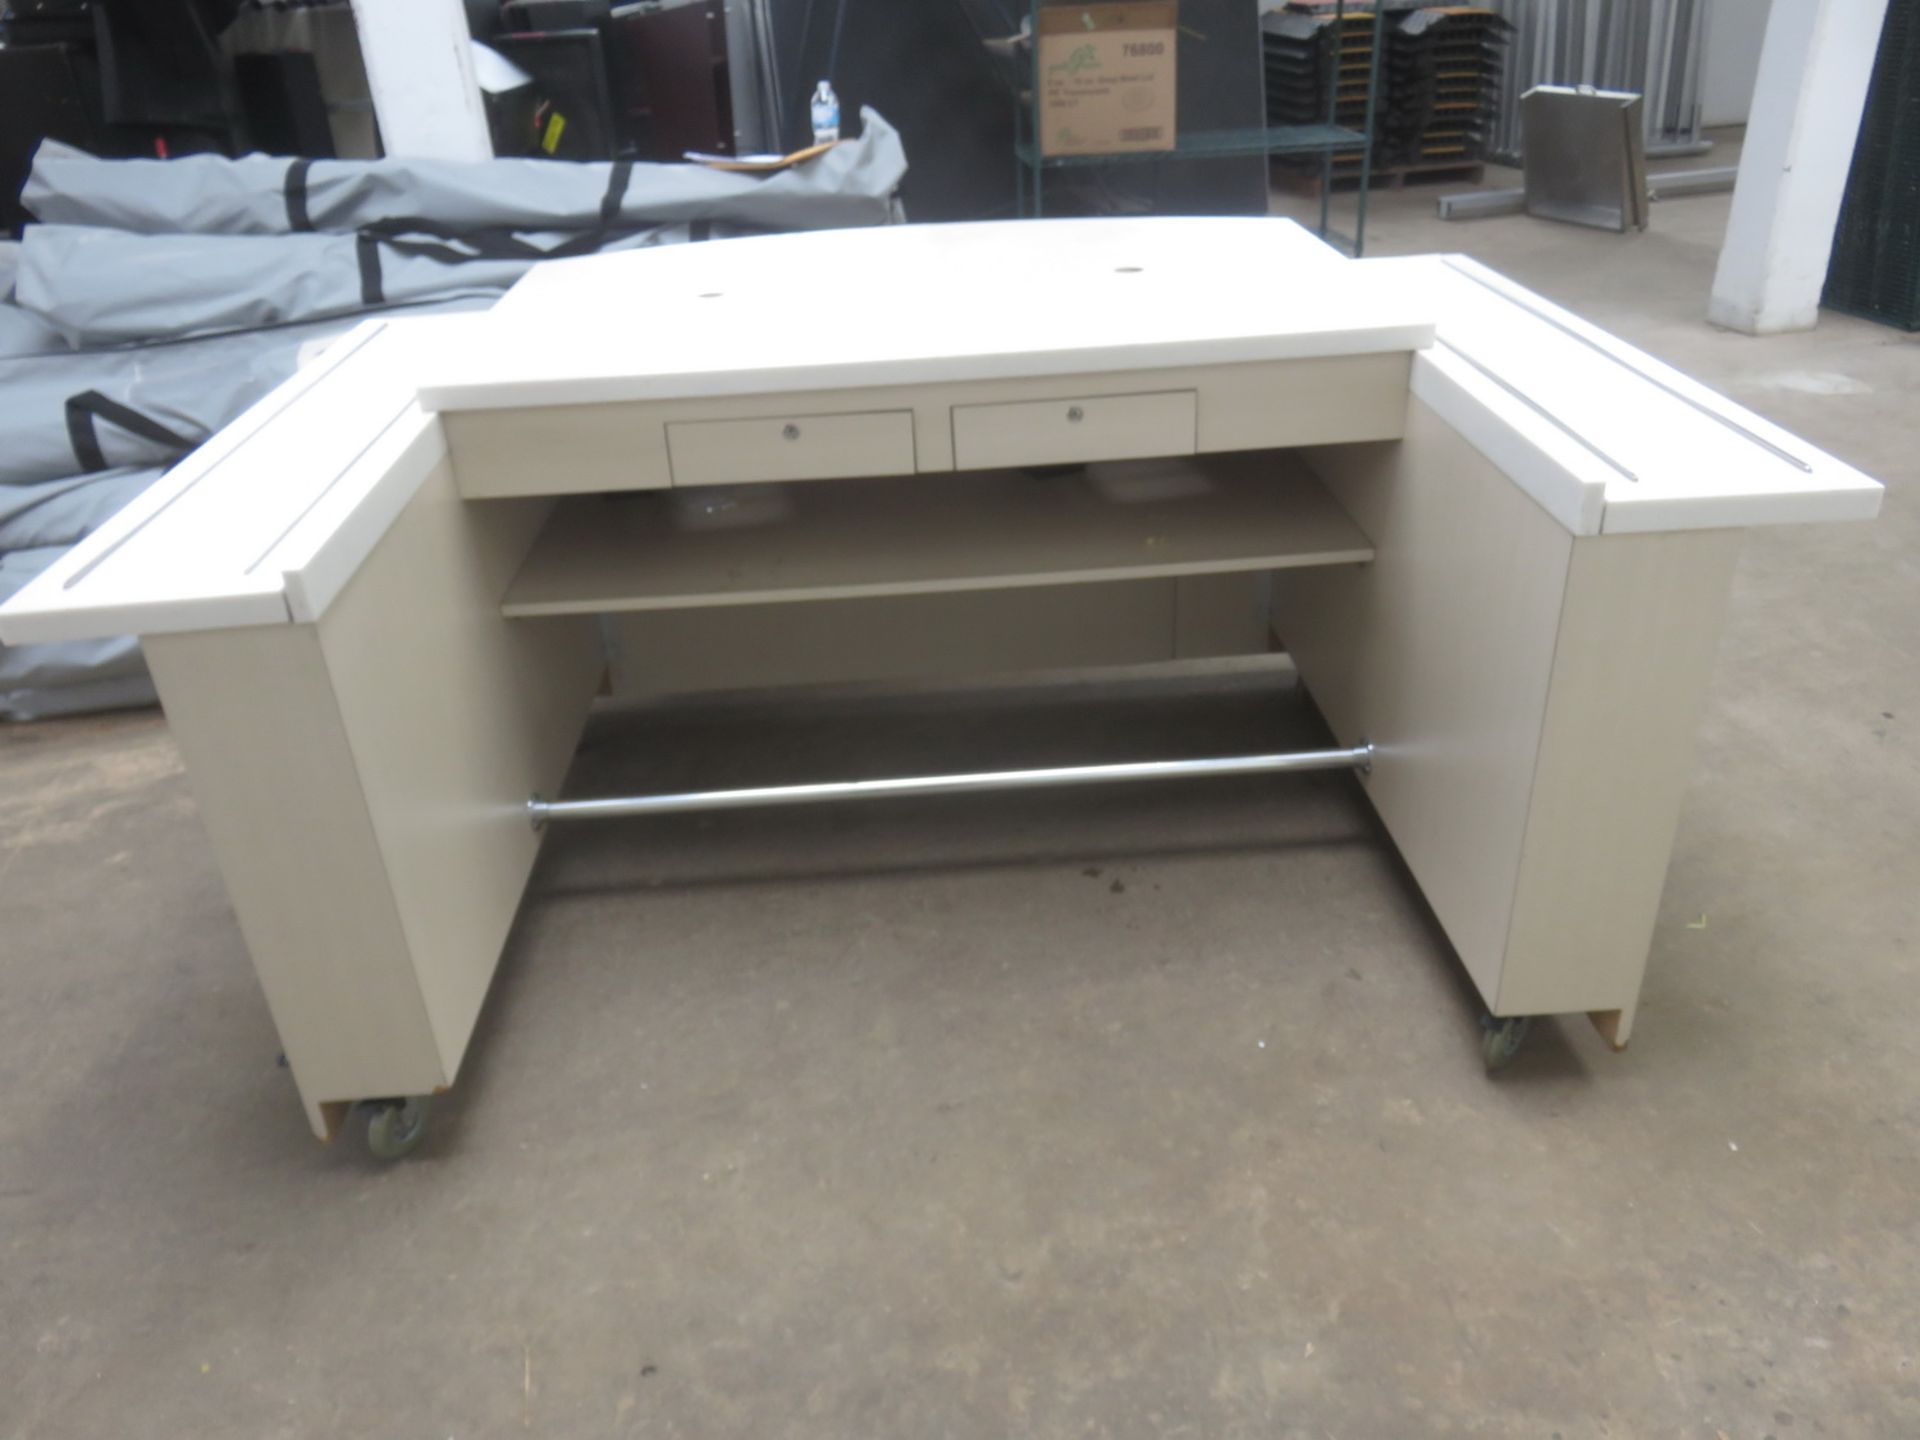 LOT - BEIGE MULTICOLOR 5' X 80"W ROLLING CAFETERIA CASH OUT COUNTER & 2-DOOR WASTE UNIT - Image 2 of 3